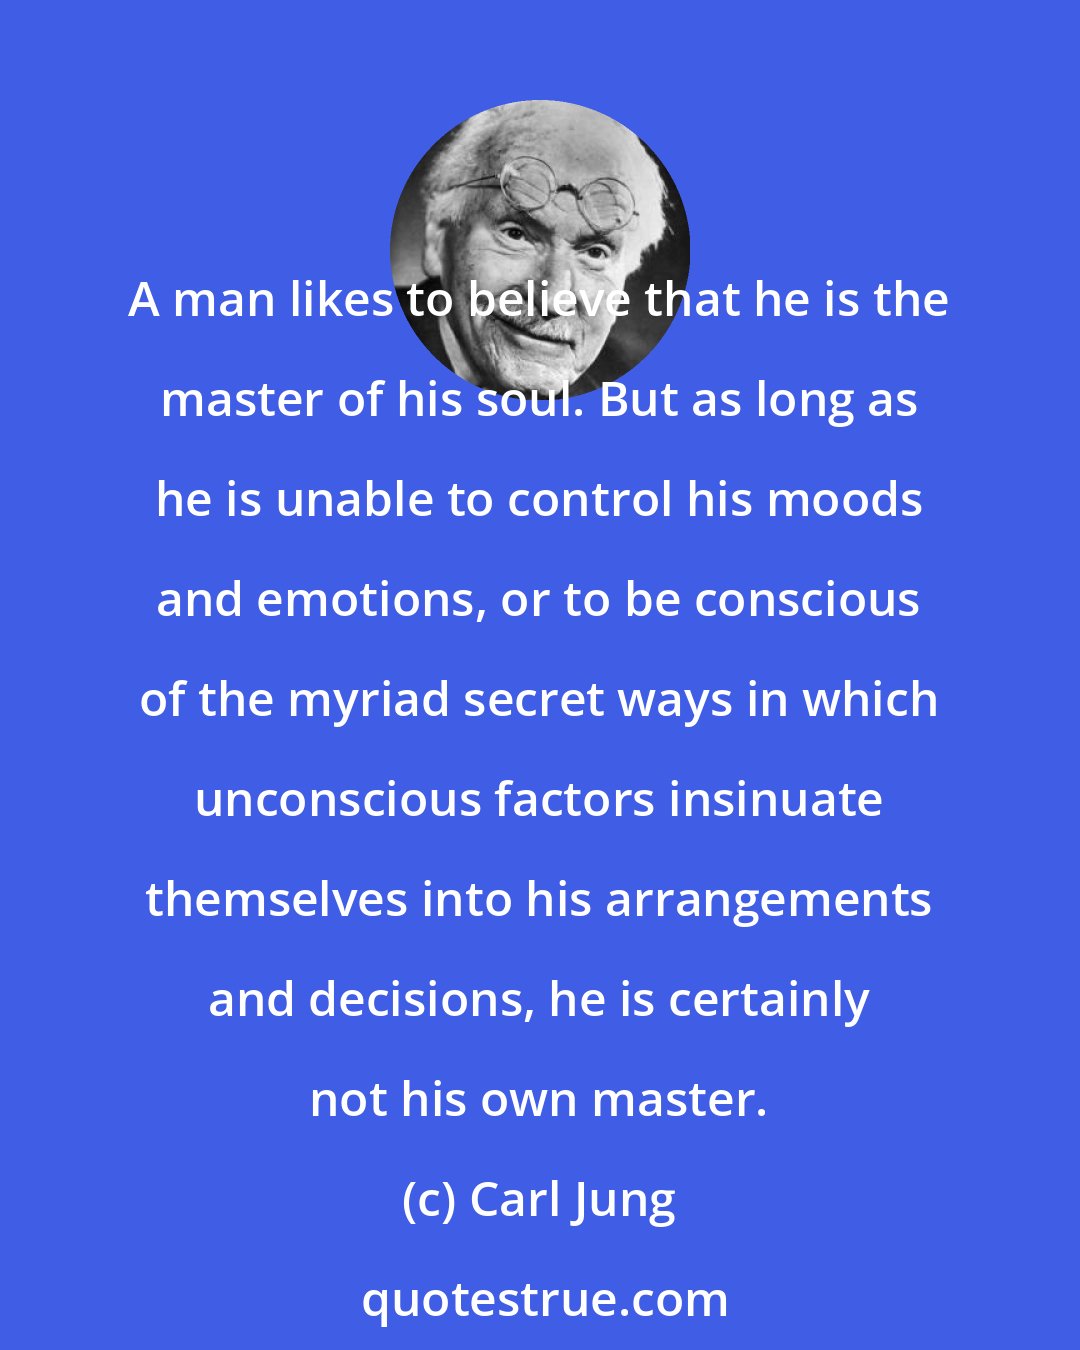 Carl Jung: A man likes to believe that he is the master of his soul. But as long as he is unable to control his moods and emotions, or to be conscious of the myriad secret ways in which unconscious factors insinuate themselves into his arrangements and decisions, he is certainly not his own master.